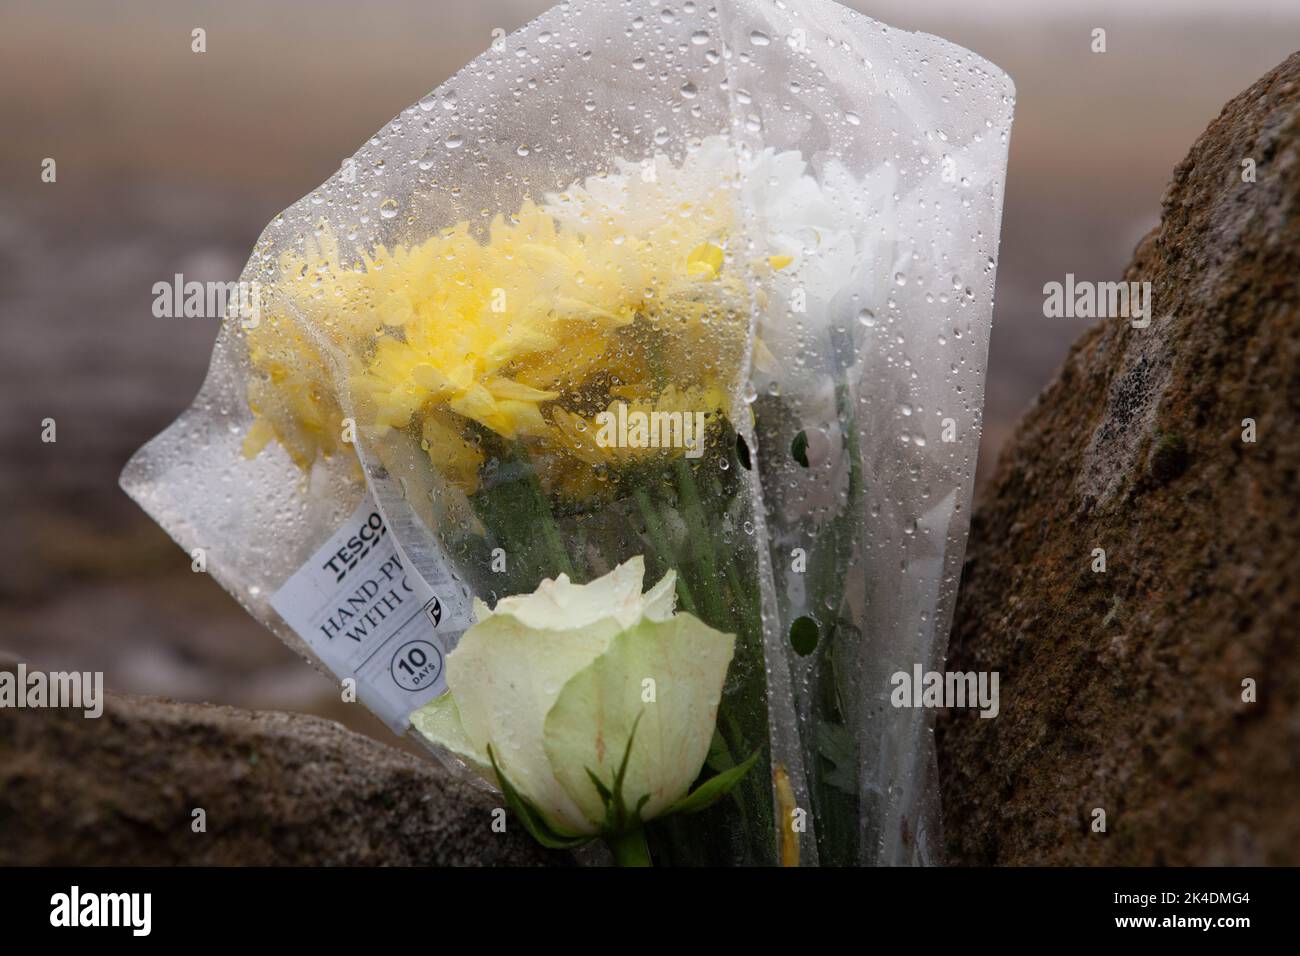 Saddleworth, Oldham, UK. 2nd October, 2022. Floral tribute left by the roadside at the scene of the recent police search for human remains in relation to the Moors Murders Peter Liggins/Alamy Live News Stock Photo